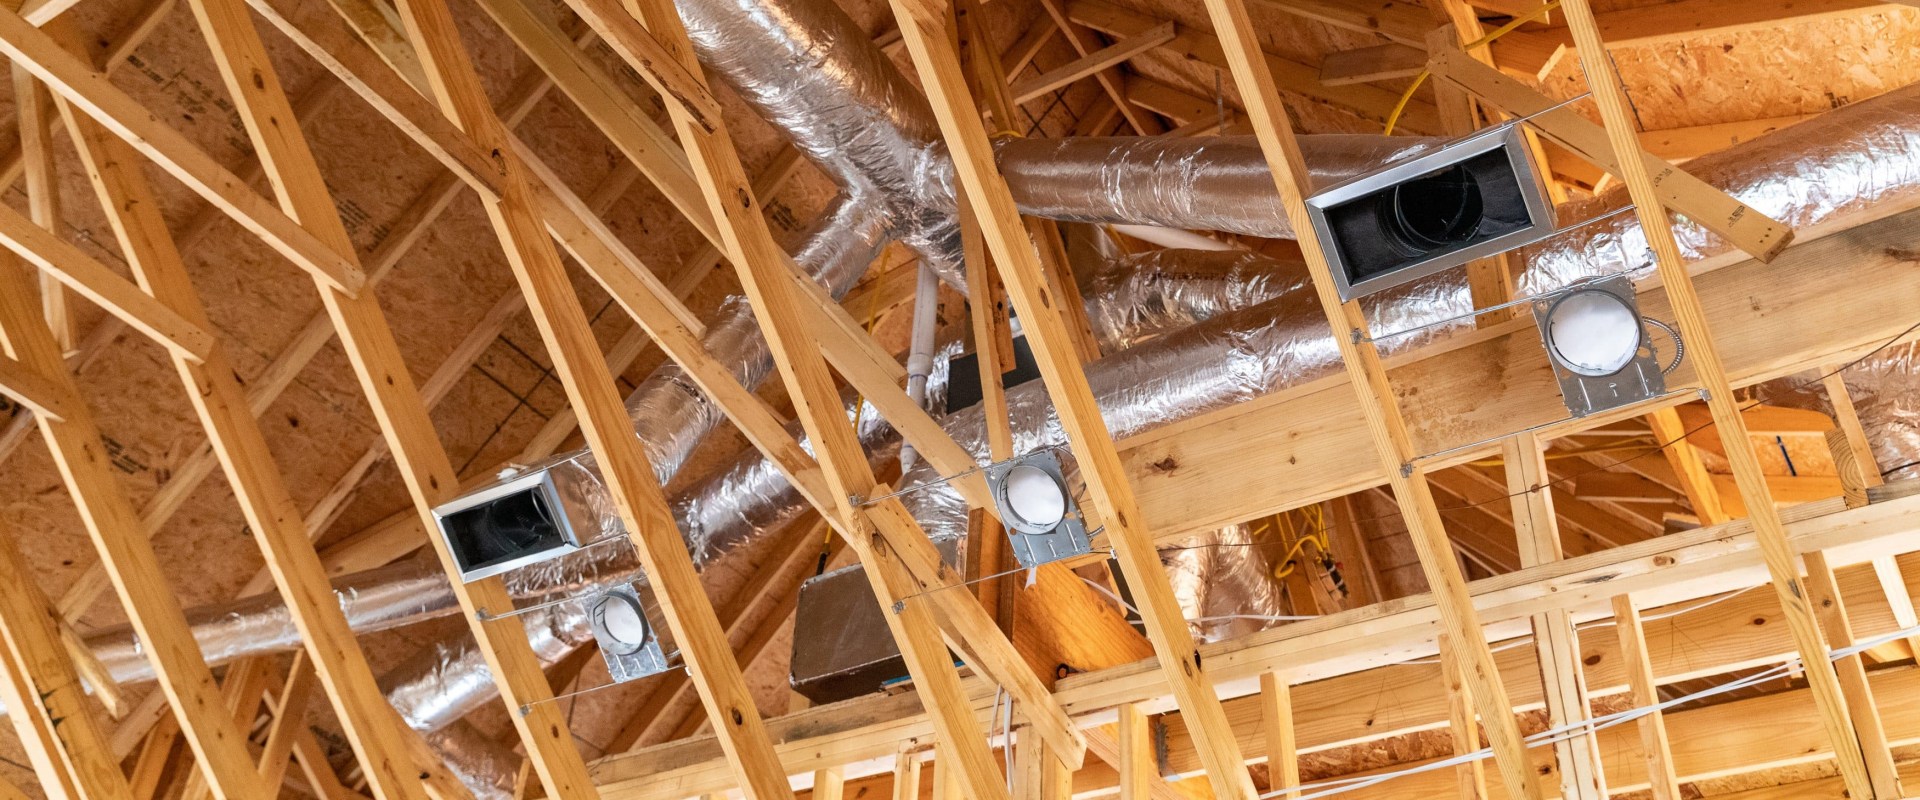 10 Signs Your Home Needs New Air Ducts: An Expert's Perspective